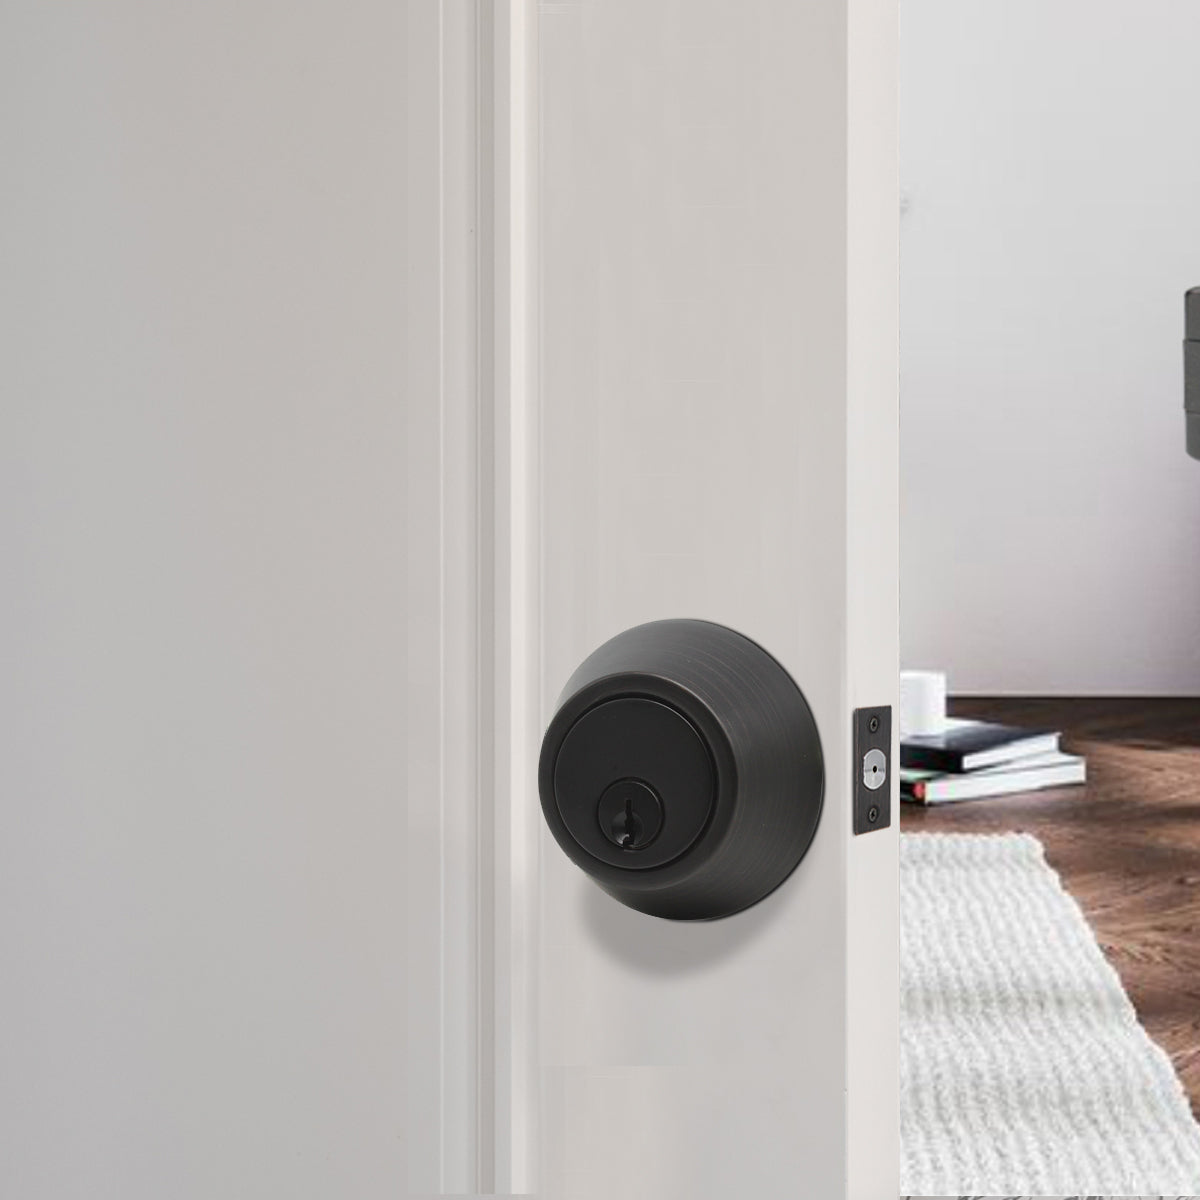 Double Cylinder Deadbolts with Key on Both Side, Keyed Entry Door Lock Oil Rubbed Bronze Finish DLD102ORB - Probrico